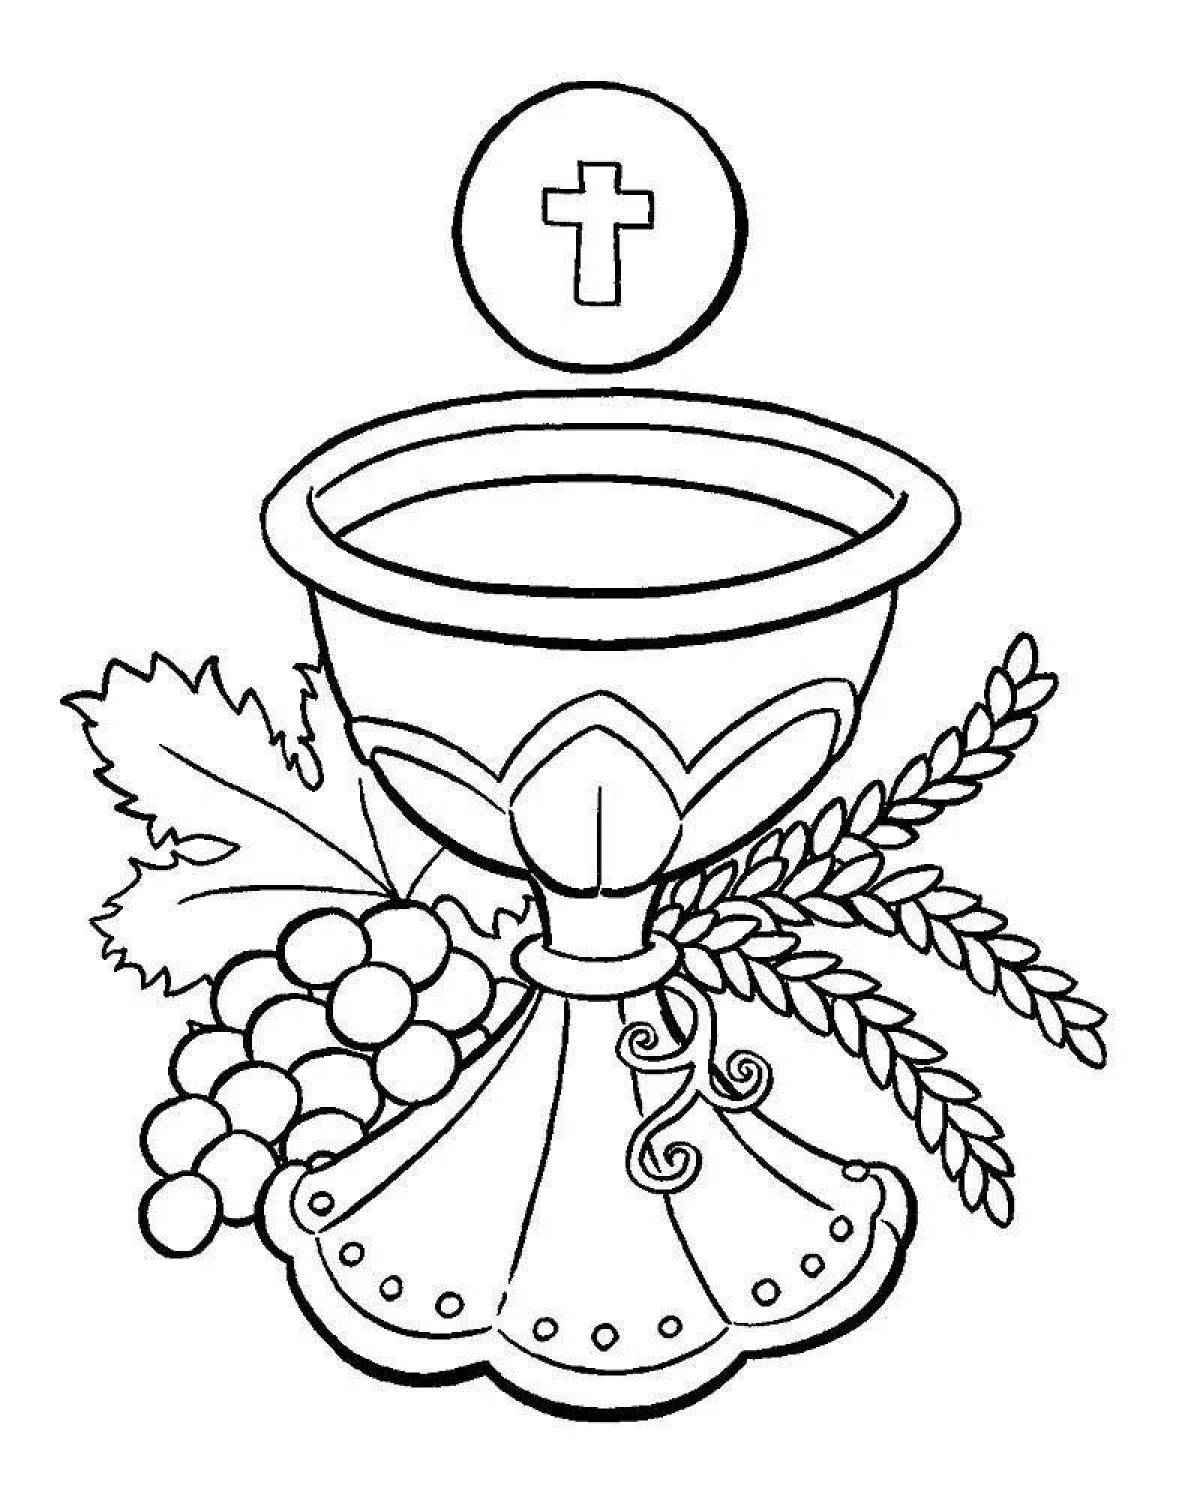 Coloring page glowing baptism of the Lord